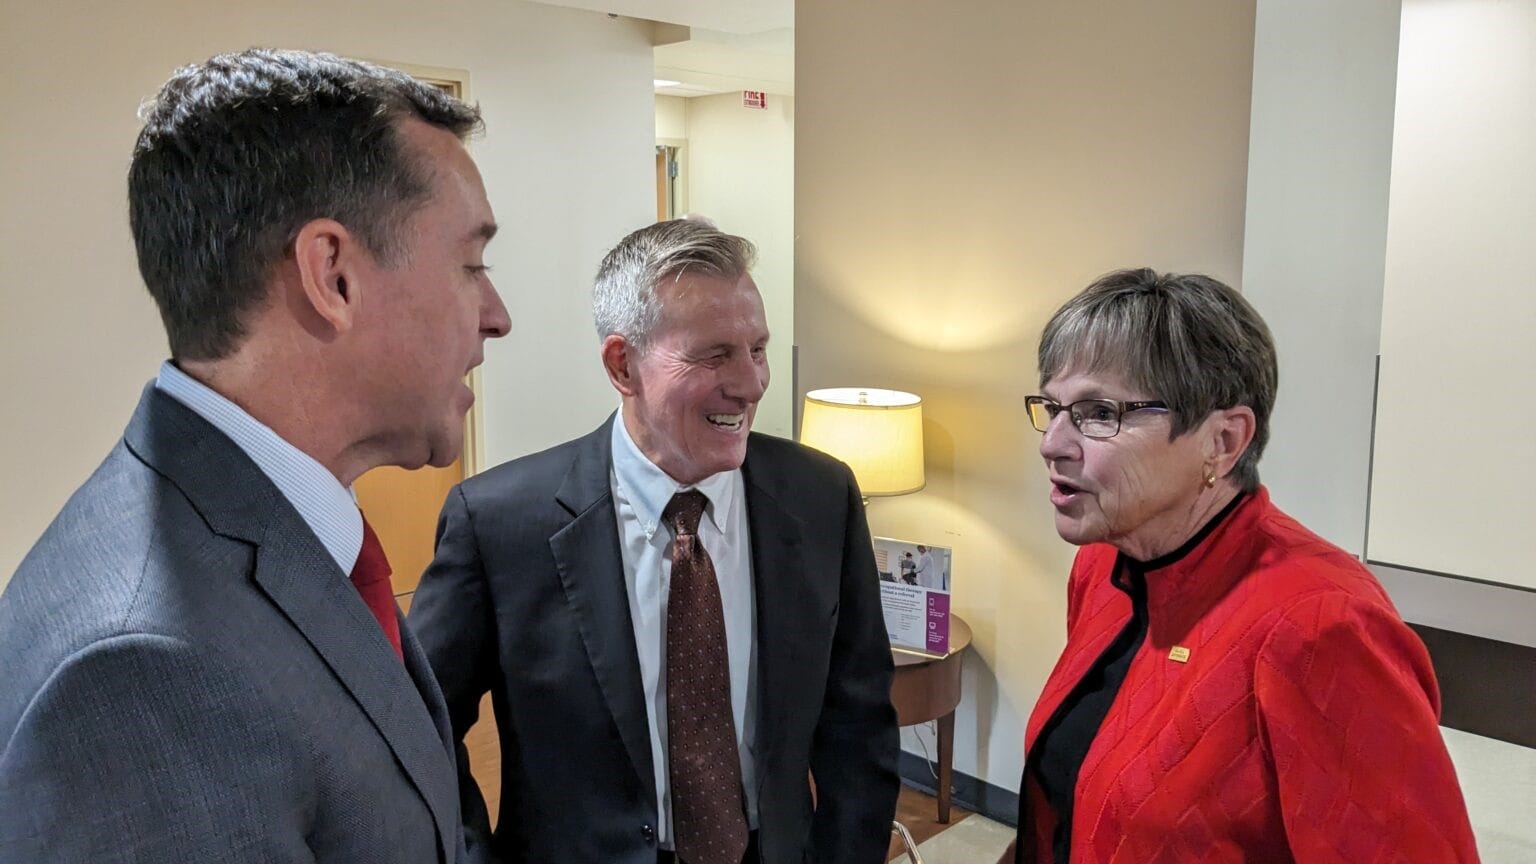 Blake Benson, board chairman of Ascension Via Christi Hospital in Pittsburg, left, and Dennis Franks, CEO of Neosho Memorial Regional Medical Center in Chanute, speak in October with Gov. Laura Kelly about expanding Medicaid coverage to nearly 150,000 more Kansans.